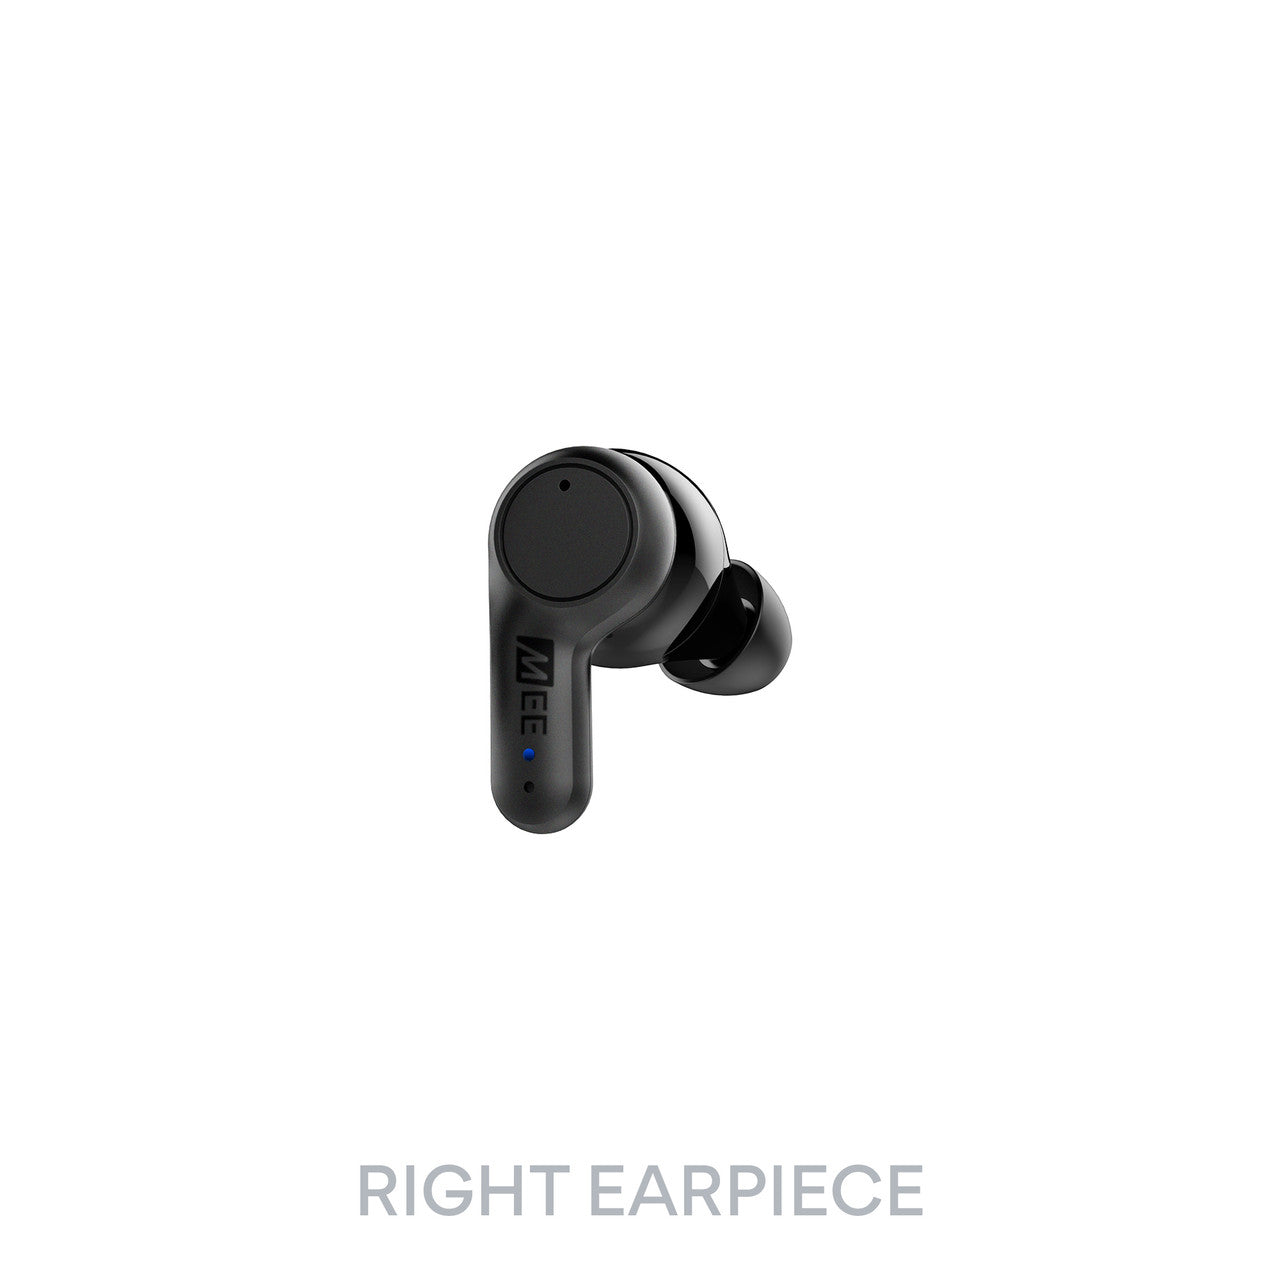 Image of Replacement Parts for X20 Truly Wireless Sports Earphones.